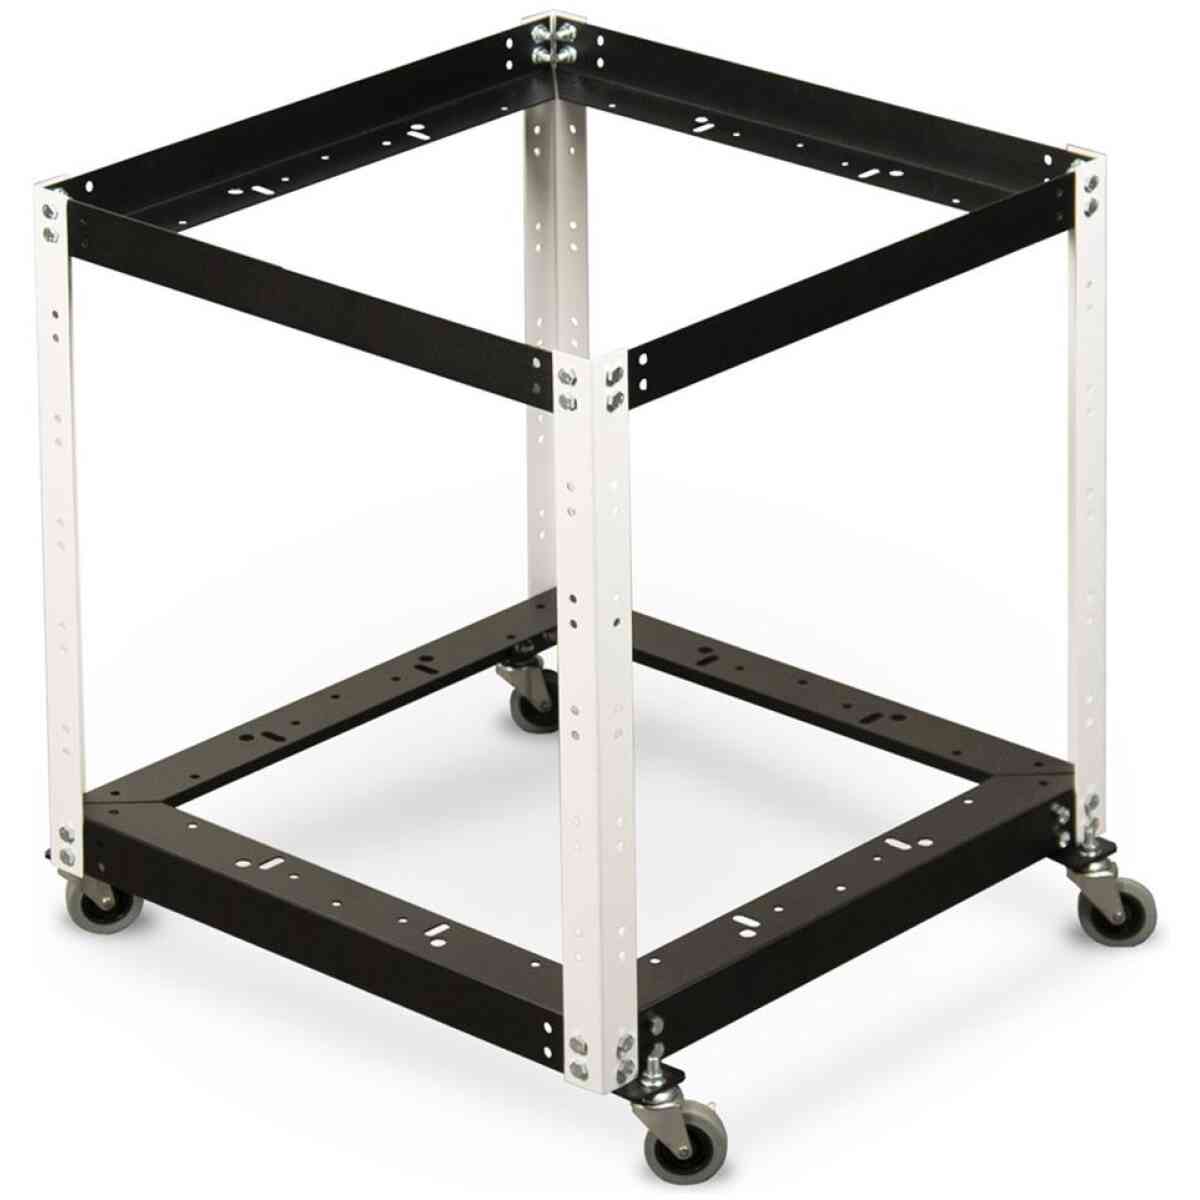 S1-27 Stand 27" Square Includes Wheels VASTEX®